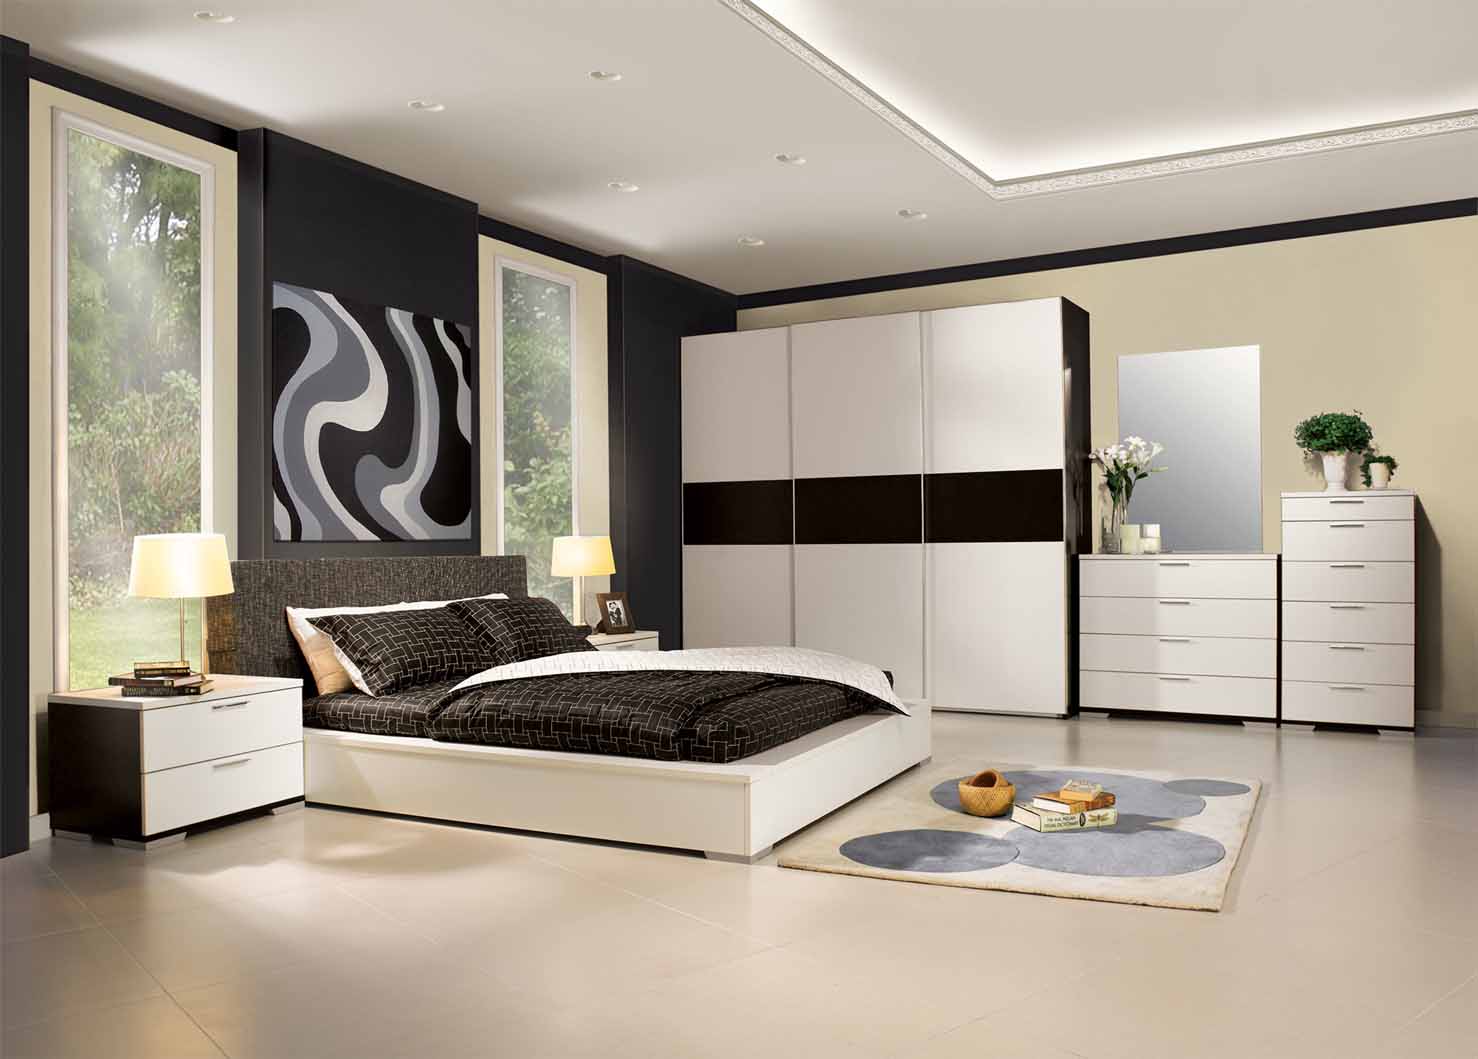 Modern Mens With Charming Modern Men's Bedroom Ideas With Black King Bed On White Platform Furnished With Twin Night Lamp On Nightstand And Completed With Rug Bedroom Mens Bedroom Ideas: The Design Character